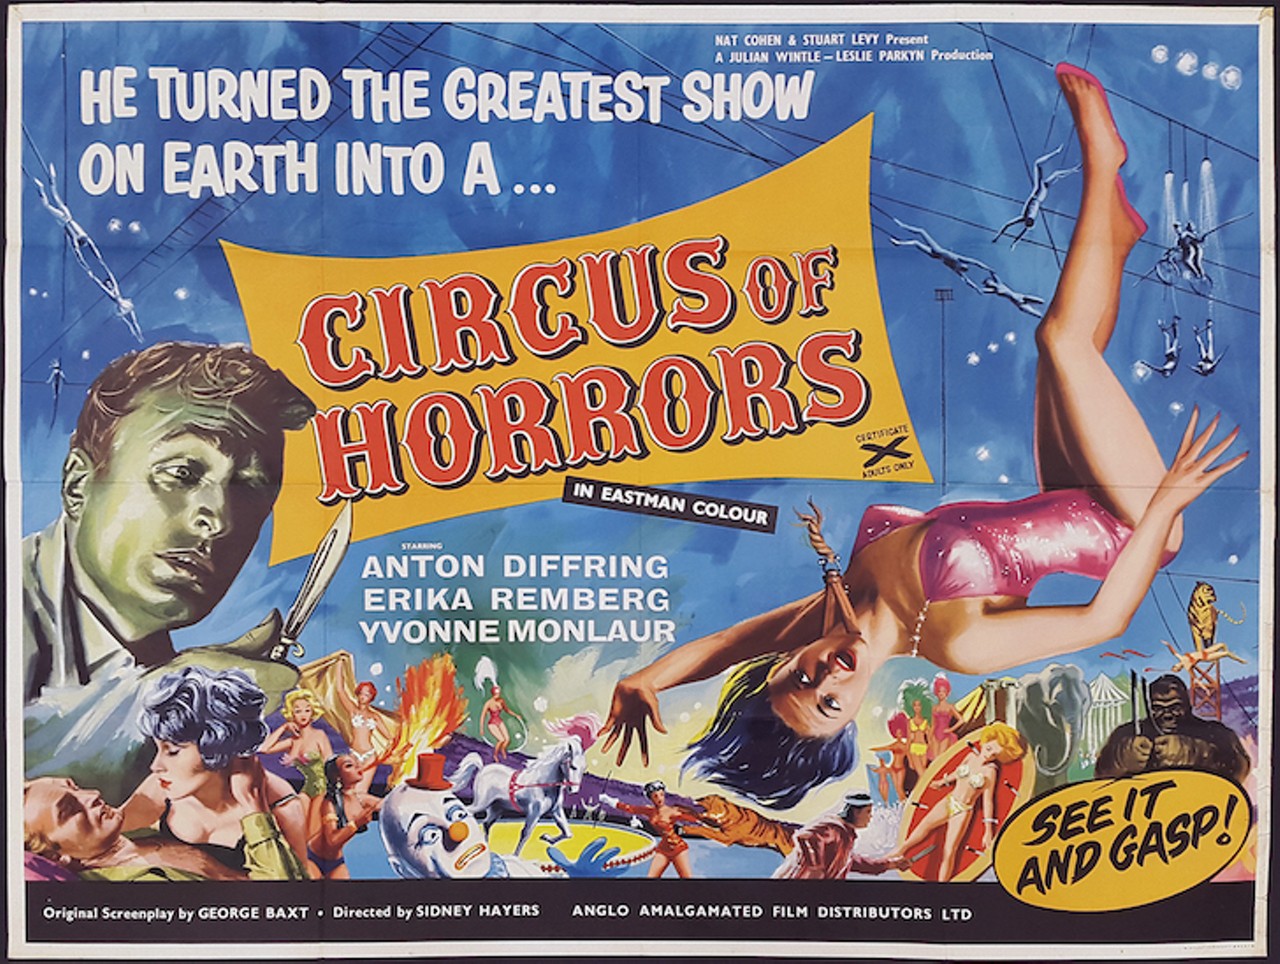 Saturday, Nov. 30Mystery Science Theater 3000 Live: Circus of Horrors at Hard Rock Live